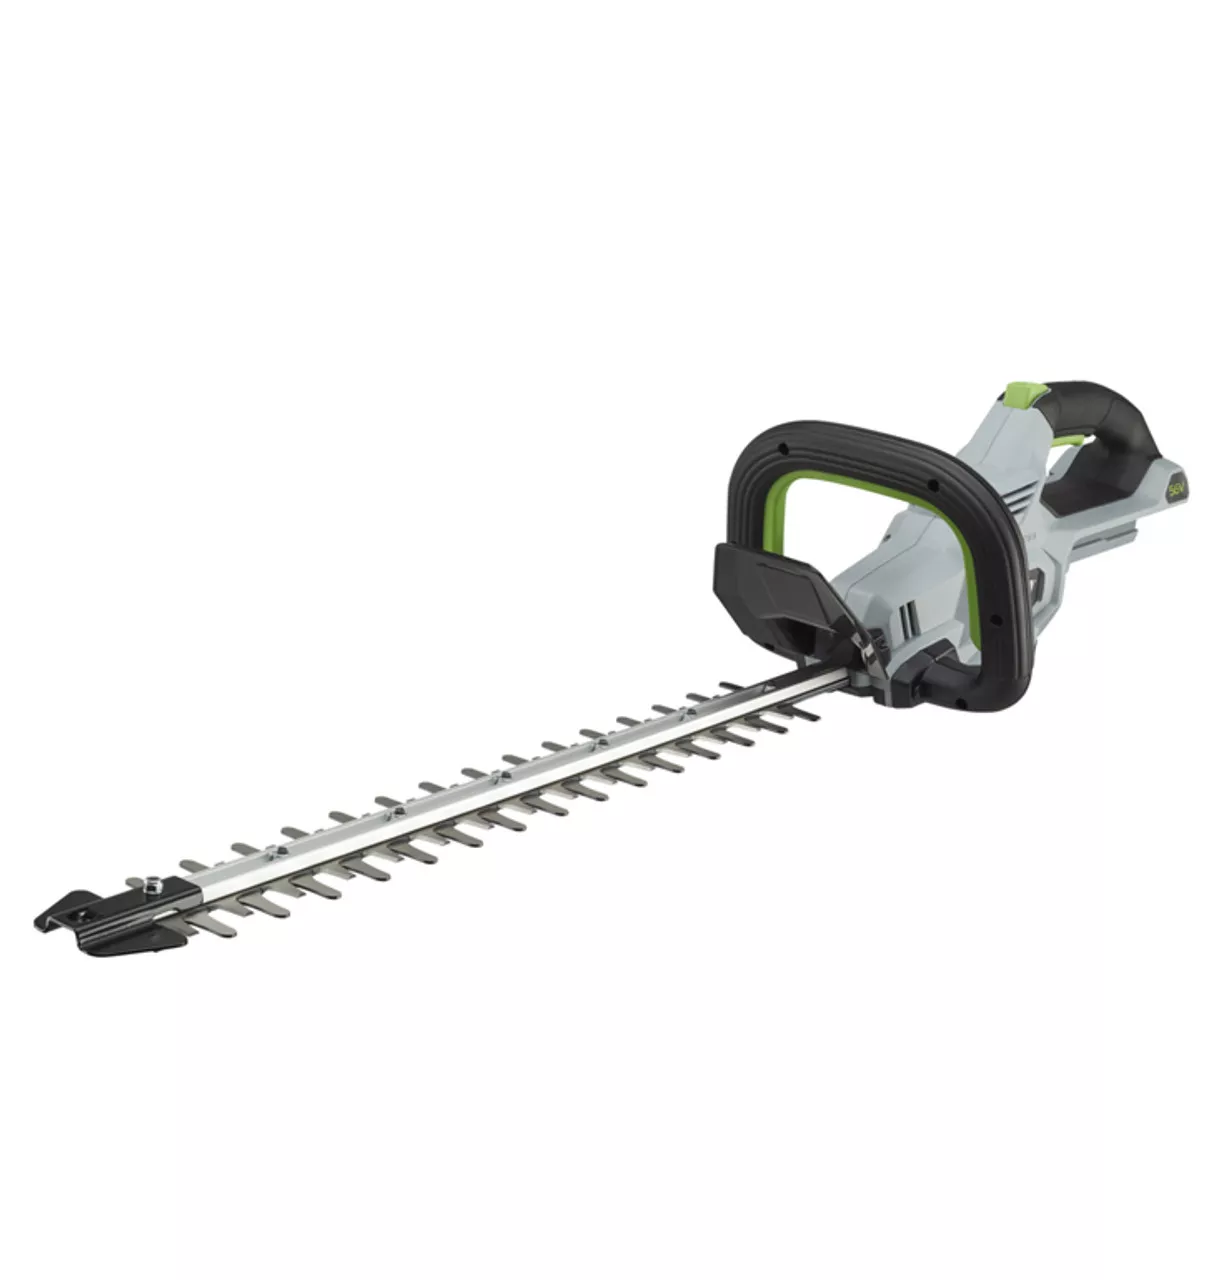 HT2000E Power Plus 51cm Hedge Trimmer (TOOL ONLY)